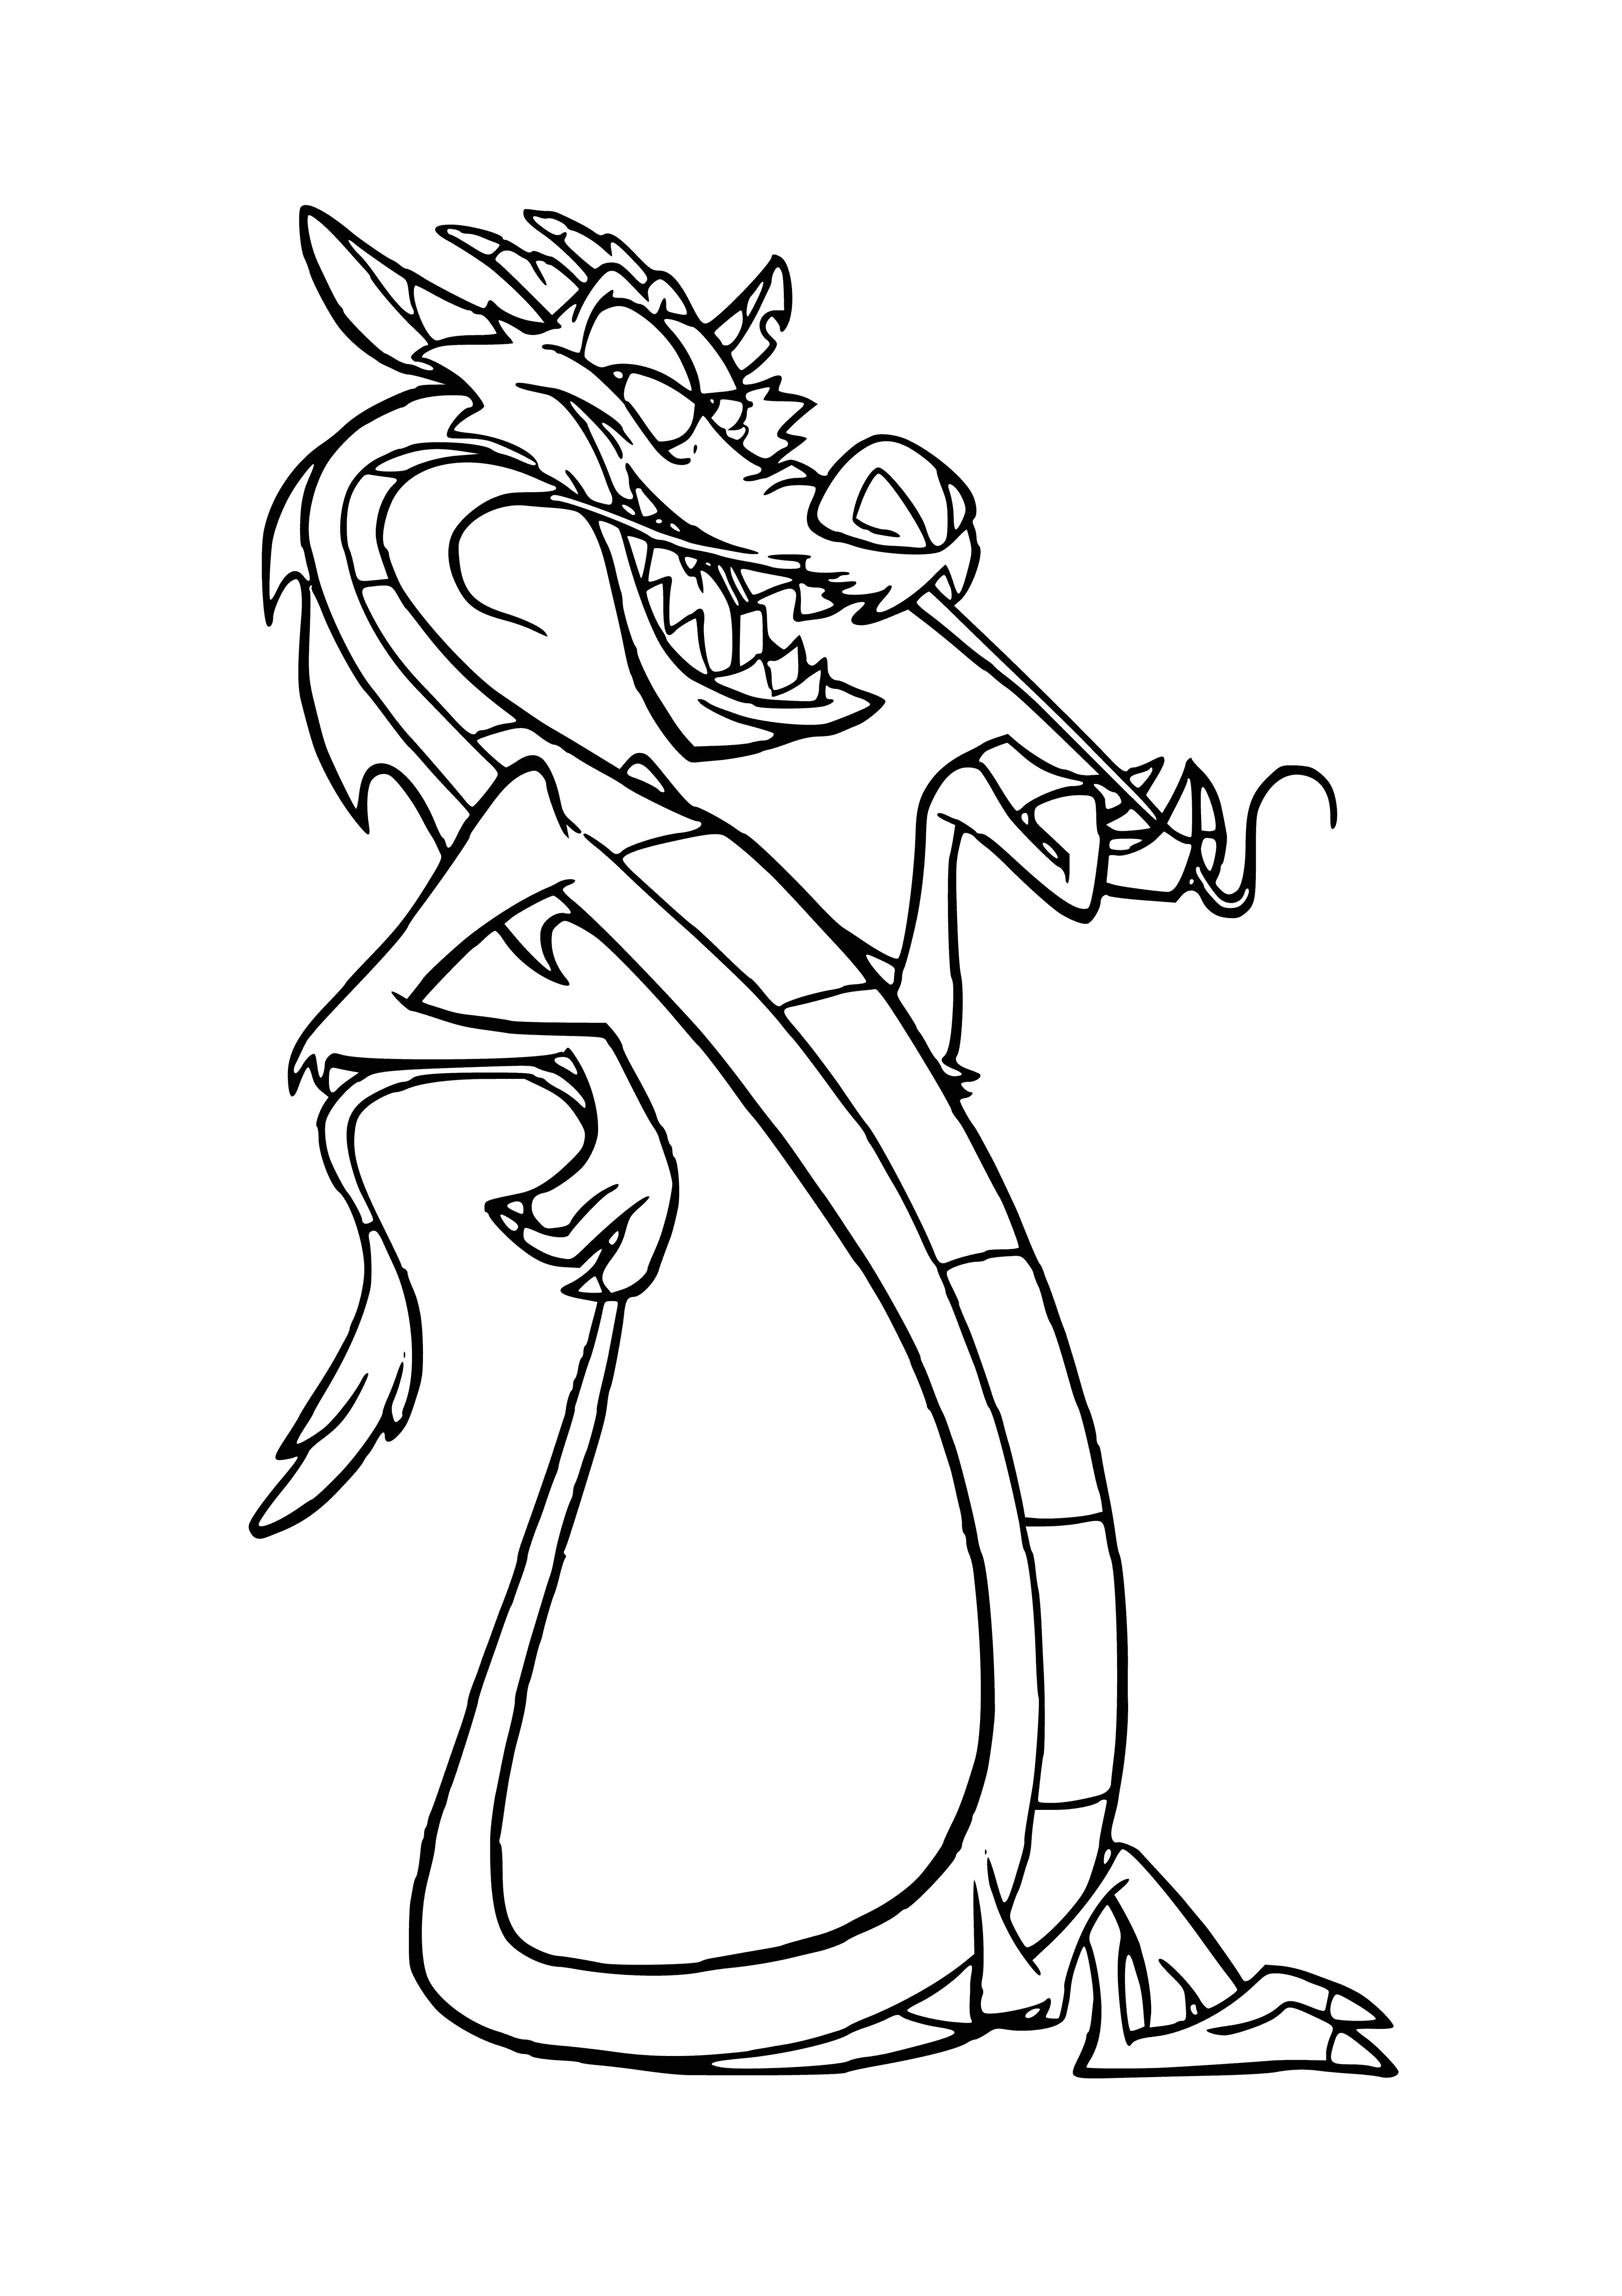 coloring page: Mulan and her dragon friend Mushu are having fun together; he's a red-scaled mischief-maker with a halo of fire!